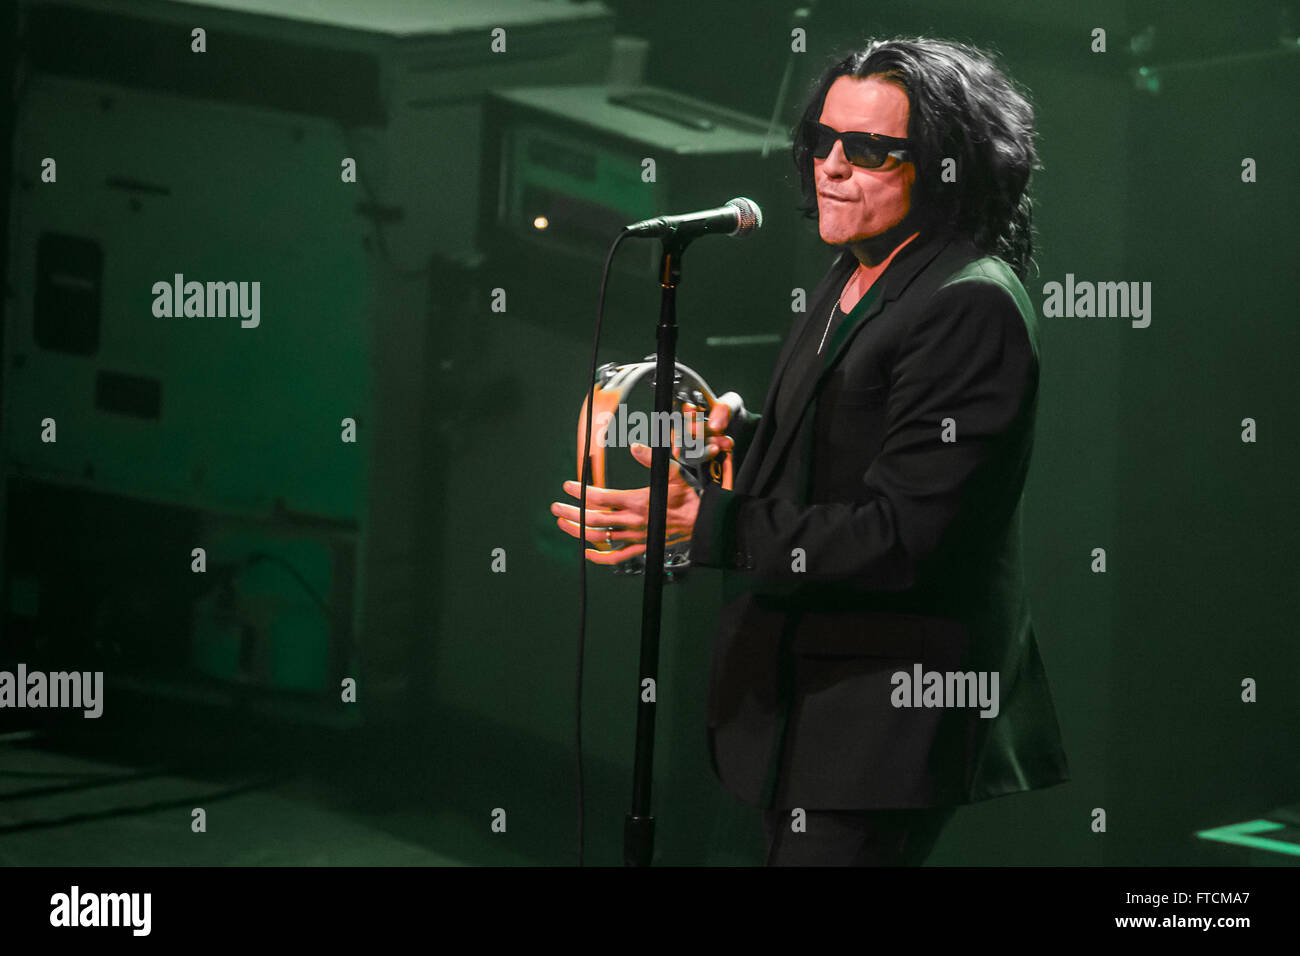 Detroit, Michigan, USA. 26th Mar, 2016. IAN ASBURY of THE CULT performing on the Alive In The Hidden City Tour at The Fillmore in Detroit, MI on March 26th 2016 © Marc Nader/ZUMA Wire/Alamy Live News Stock Photo